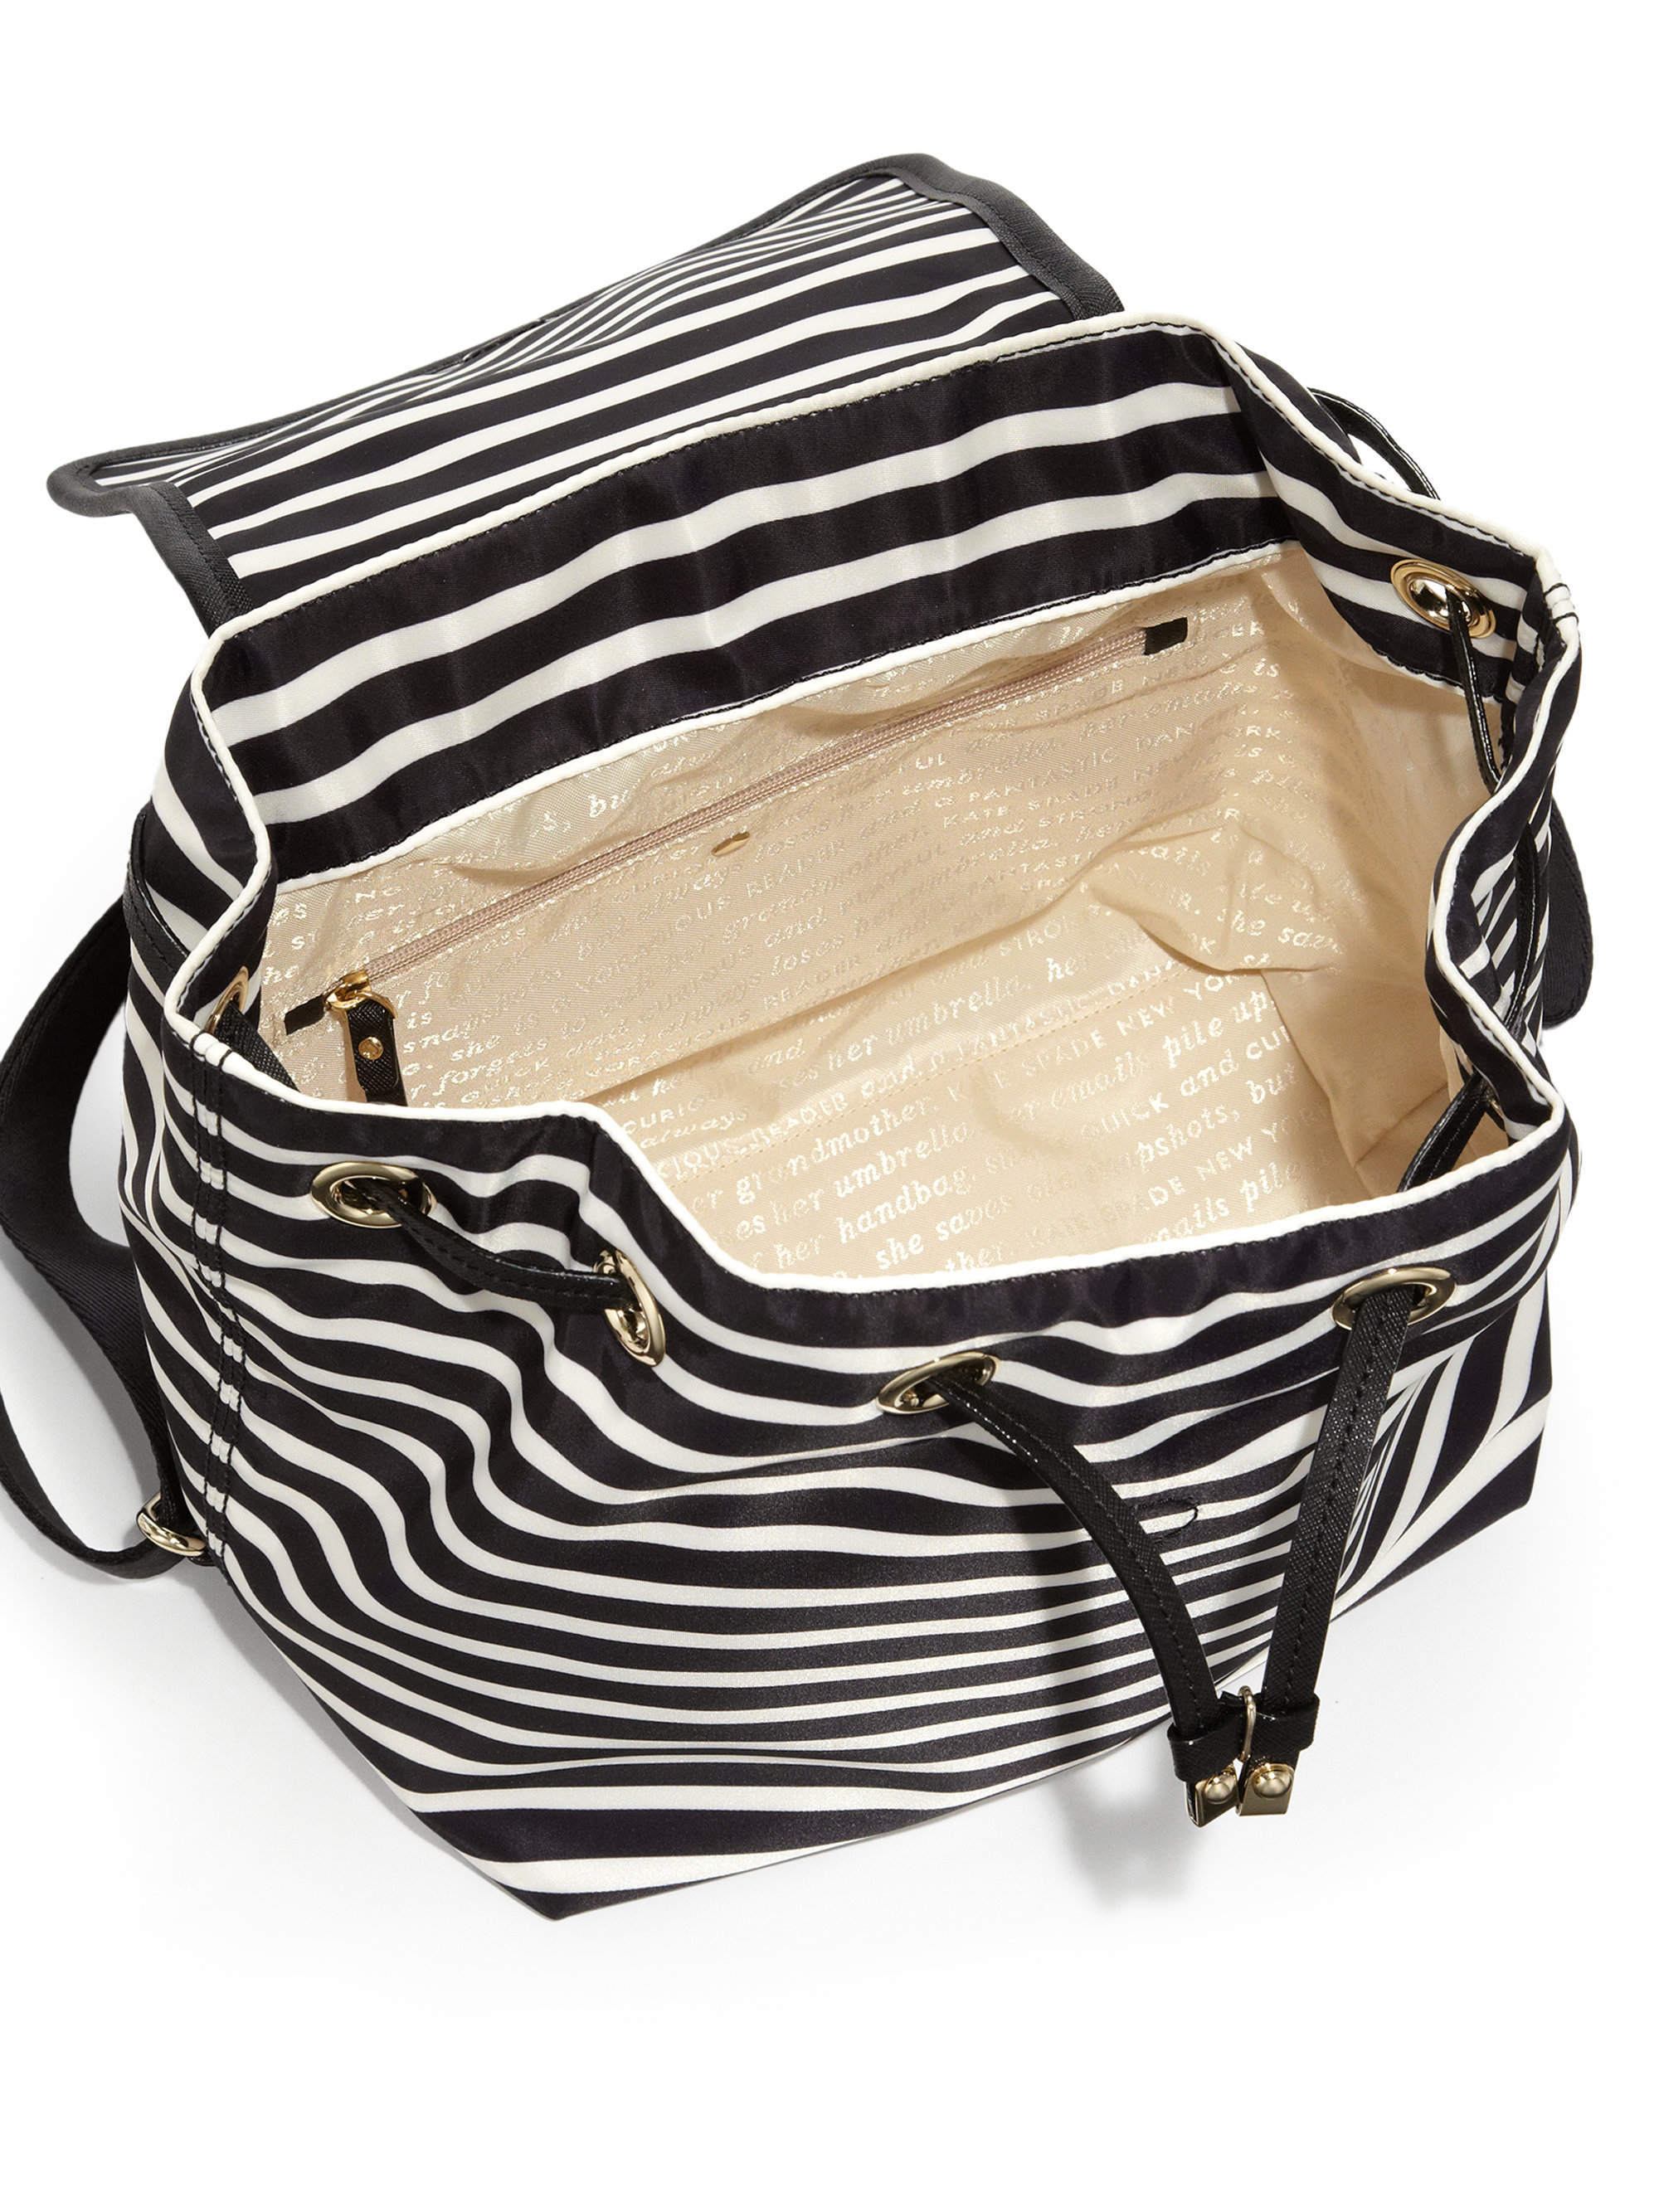 Kate Spade Classic Striped Molly Backpack in Black-White (Black) - Lyst